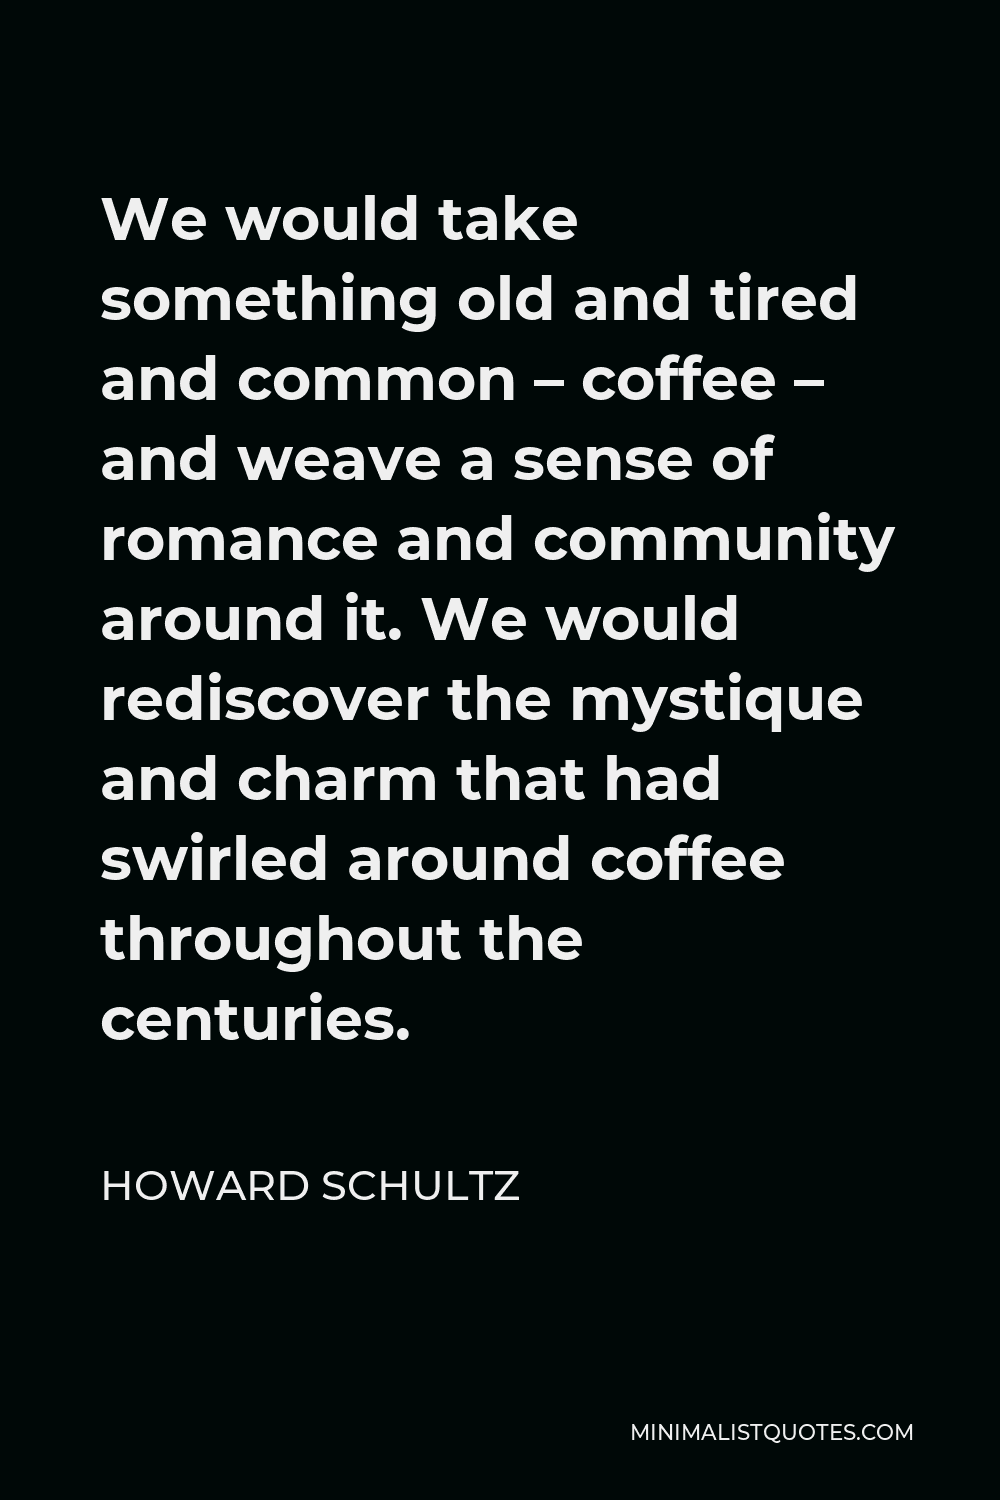 Howard Schultz Quote - We would take something old and tired and common – coffee – and weave a sense of romance and community around it. We would rediscover the mystique and charm that had swirled around coffee throughout the centuries.